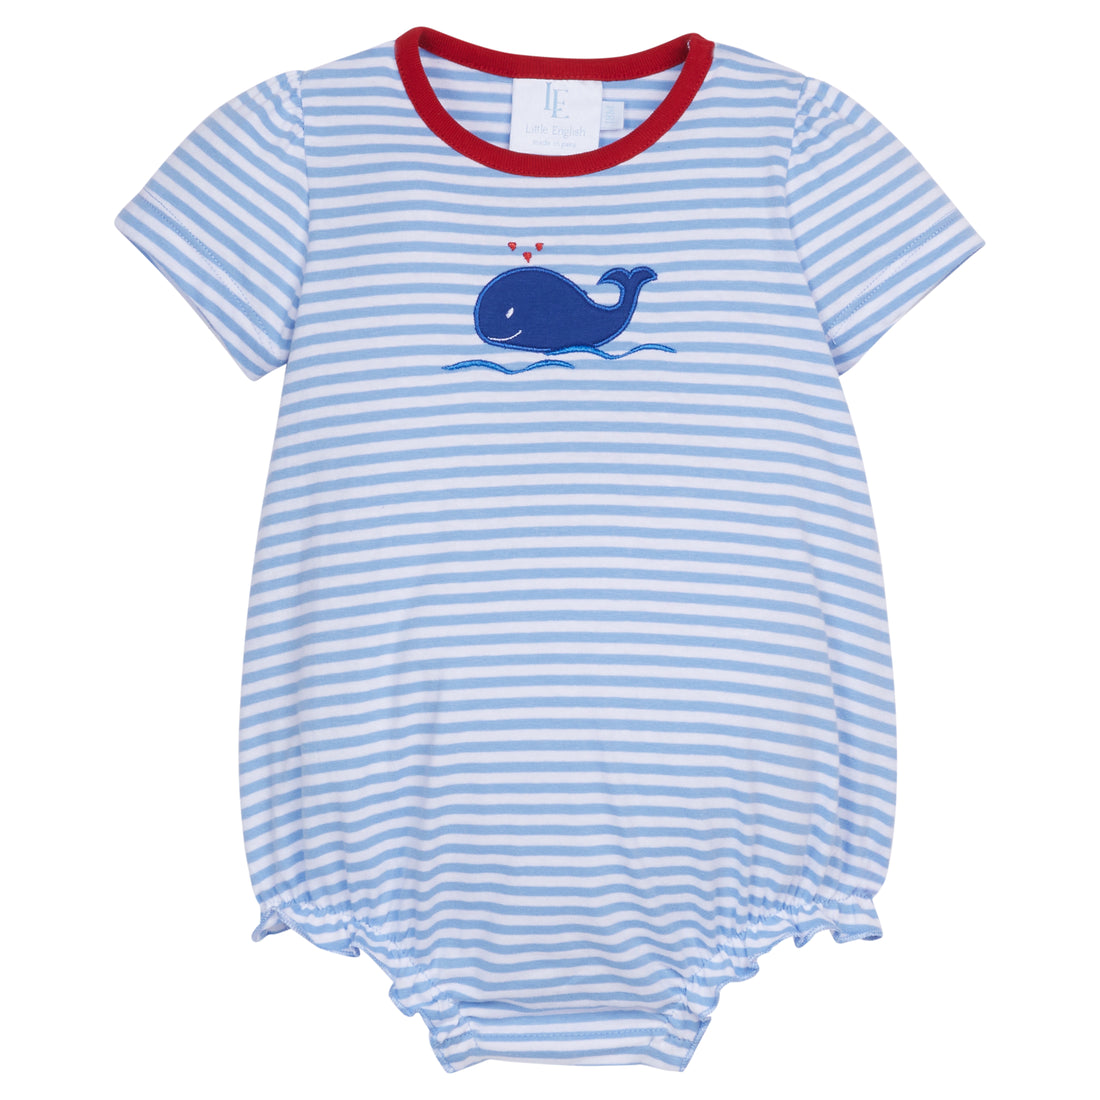 Little English classic children’s clothing, baby&